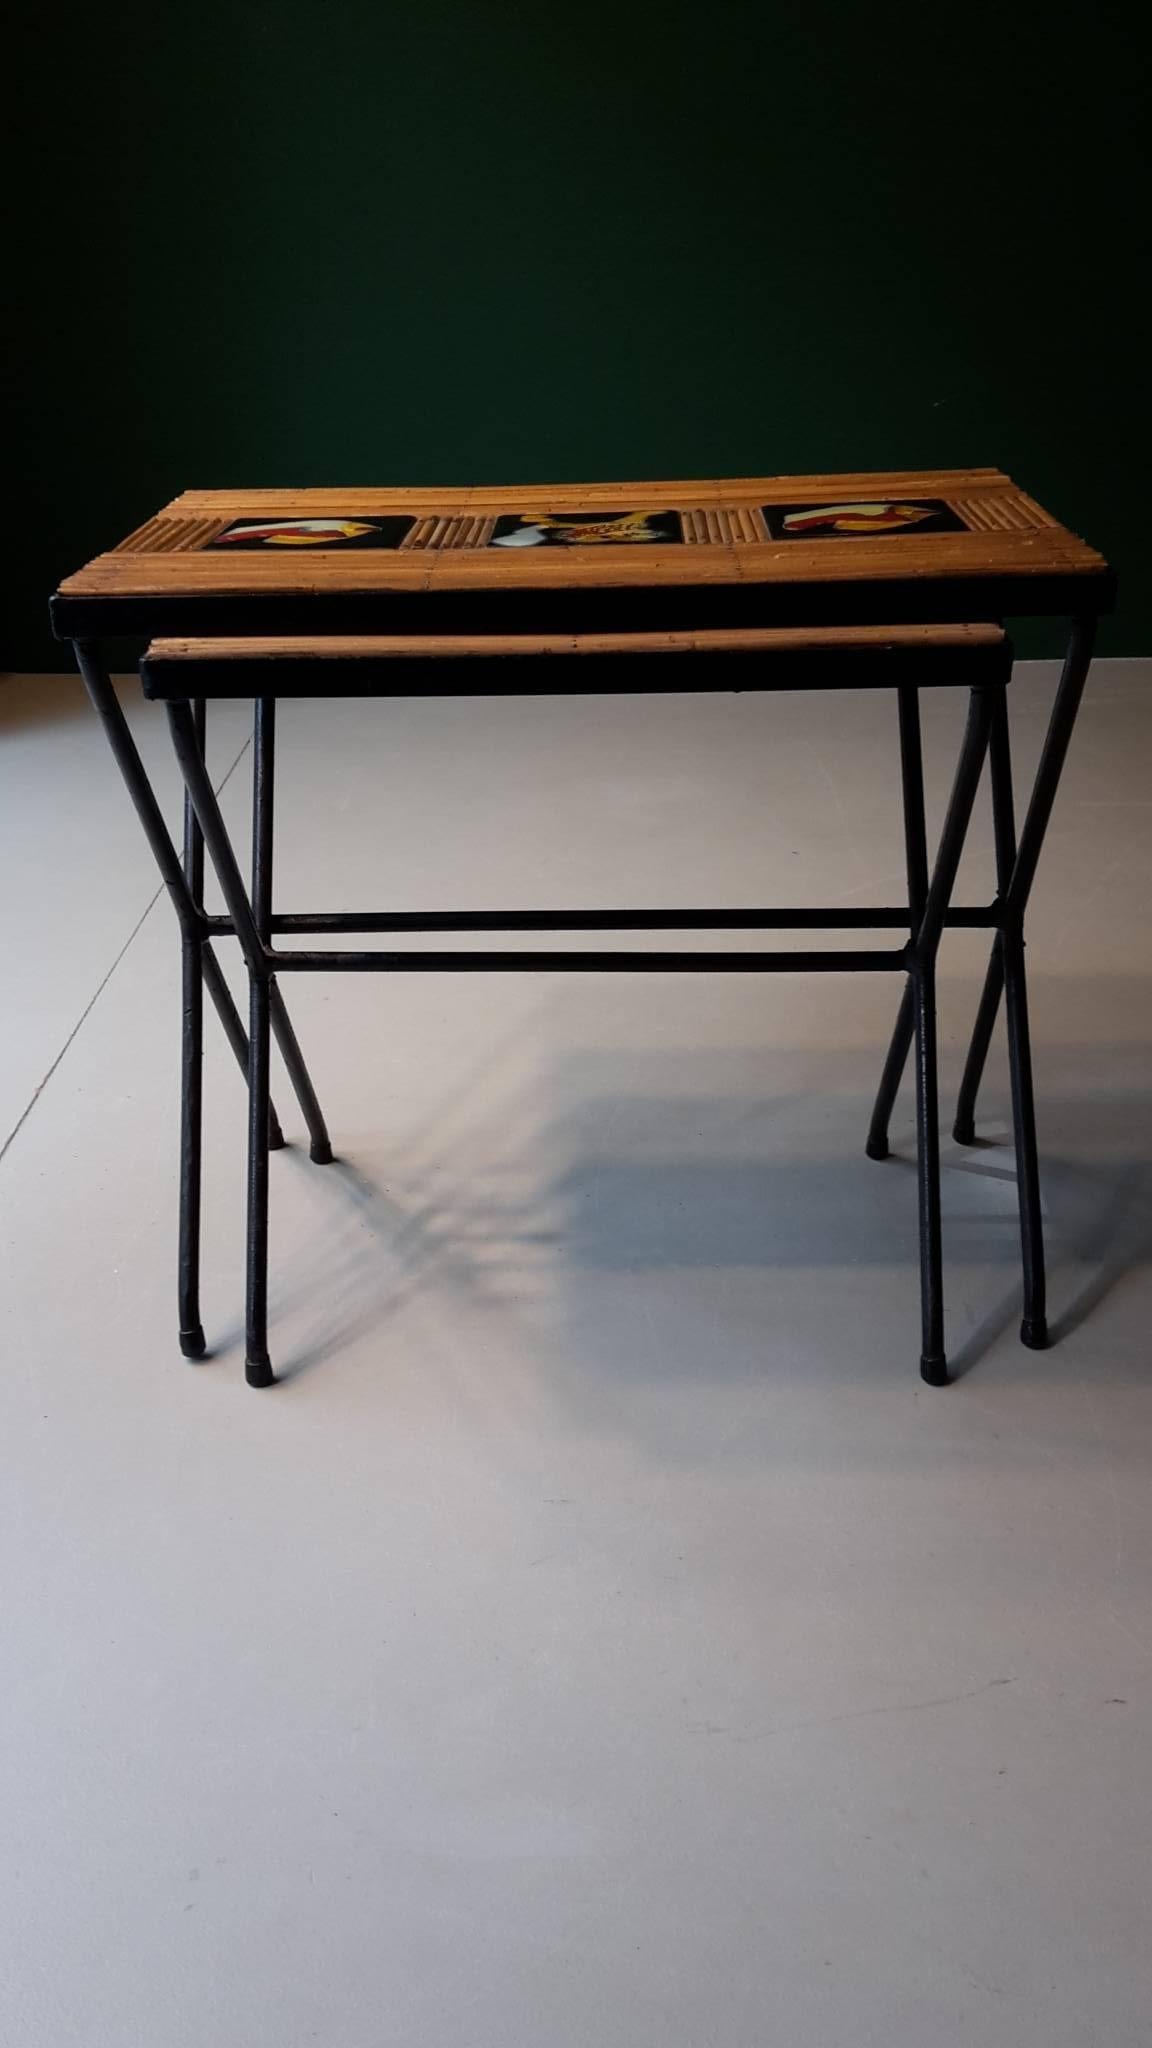 20th century French nest of table 1950s made of wicker and painted tiles.